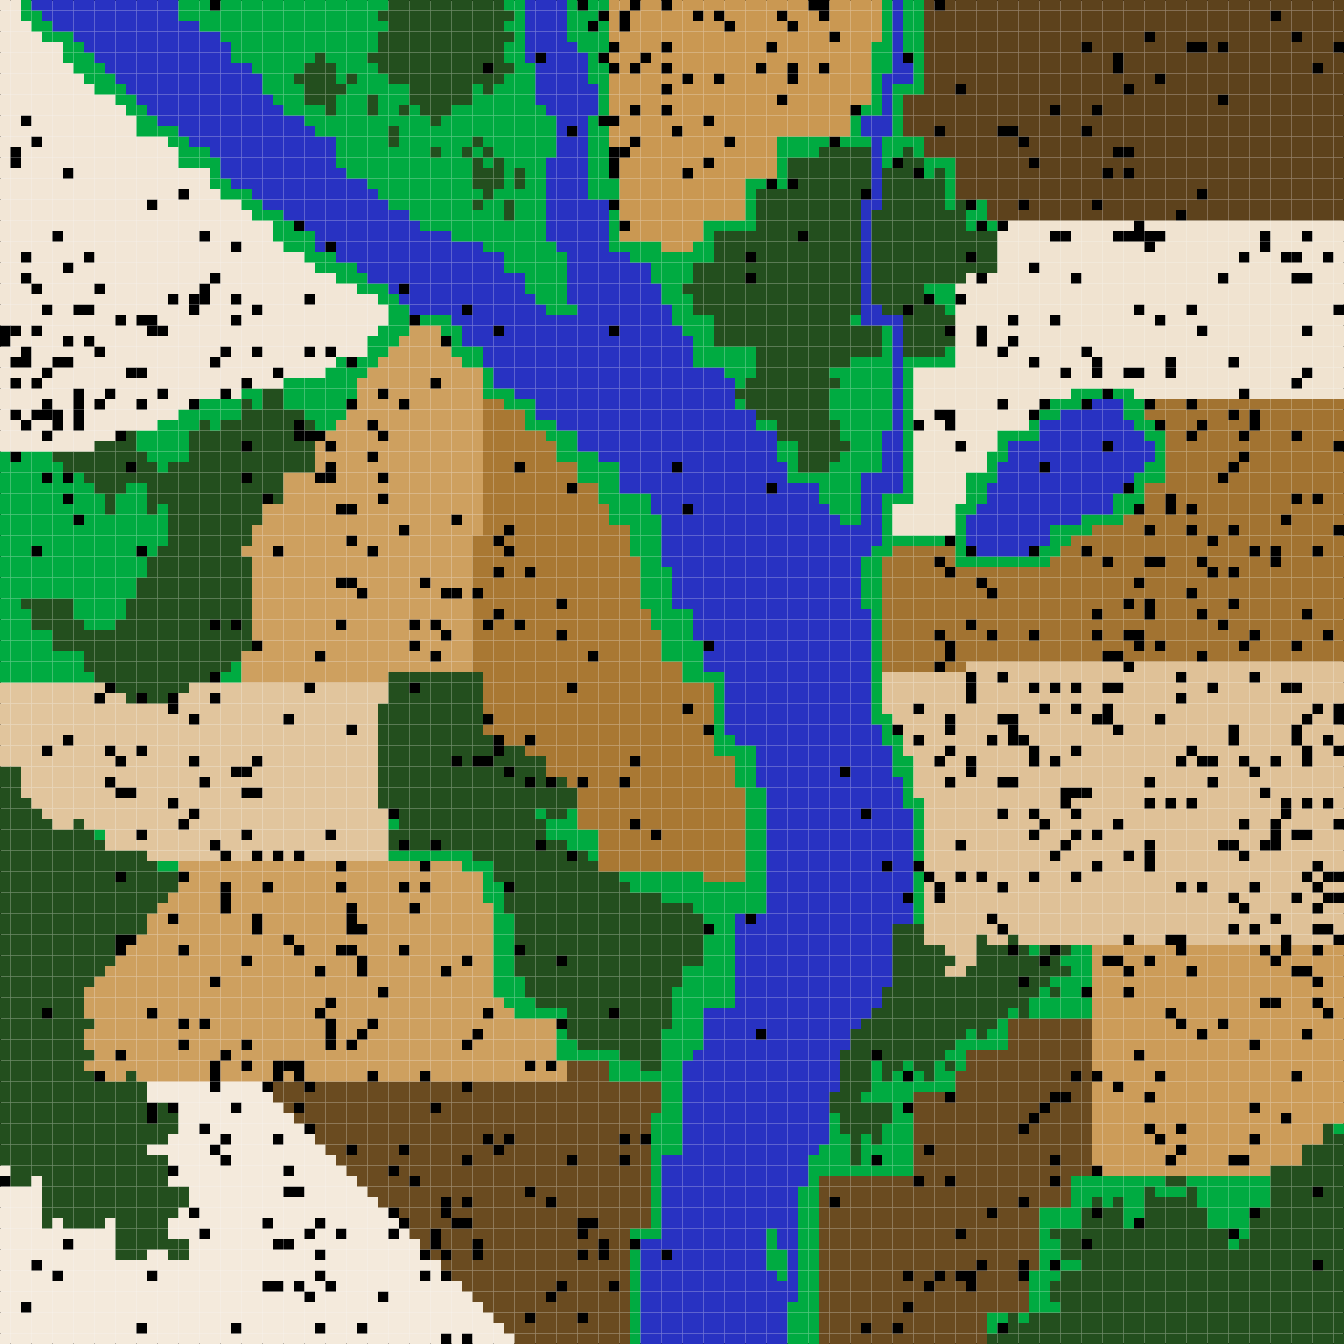 **Figure 11**. *A complex landscape for simulating the ecology of pests and the evolution of pesticide resistance on farmland in the resevol R package. Terrain includes farms (brown colours), grassland (light green), forest (dark green), and water (blue). Black points show the locations of individual pests after 240 time steps for a simulation in which pesticides are not rotated over time.*